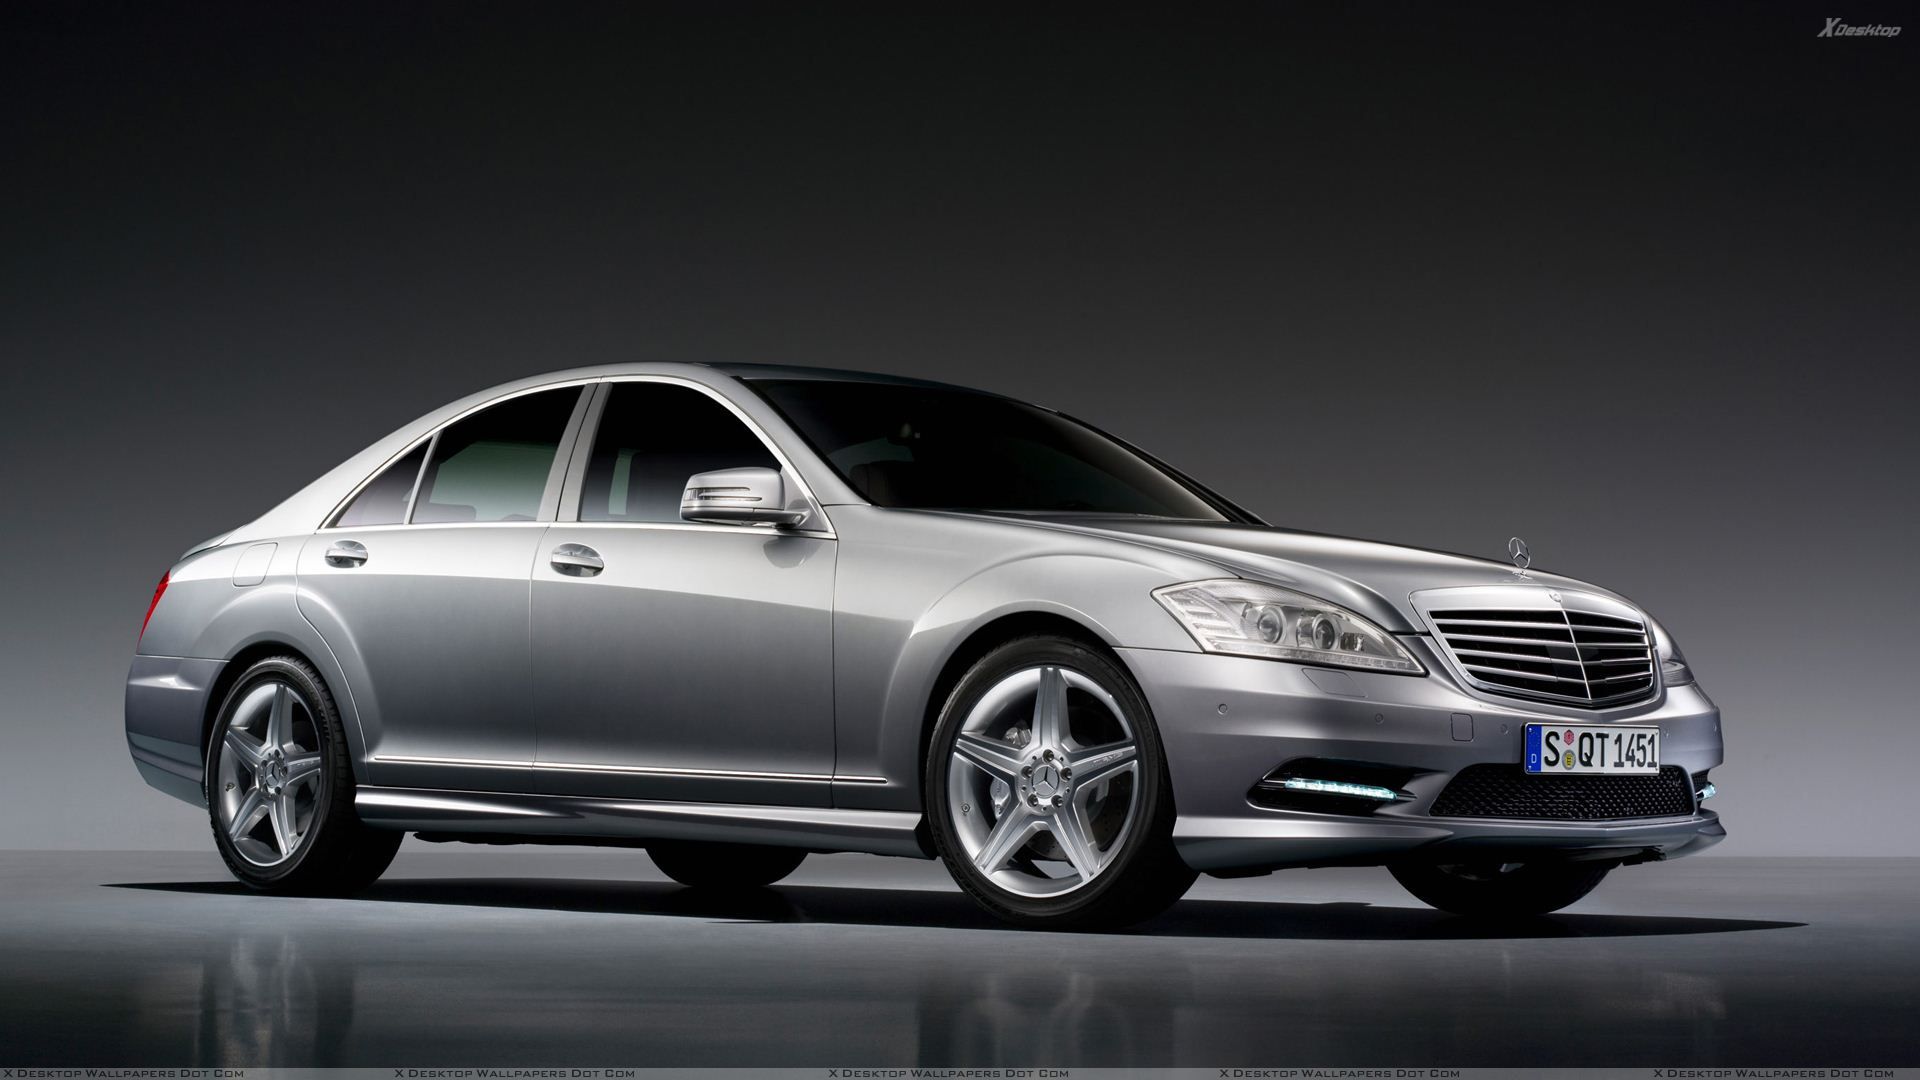 Mercedes-Benz E 500 Coupe Amg Styling Wallpapers